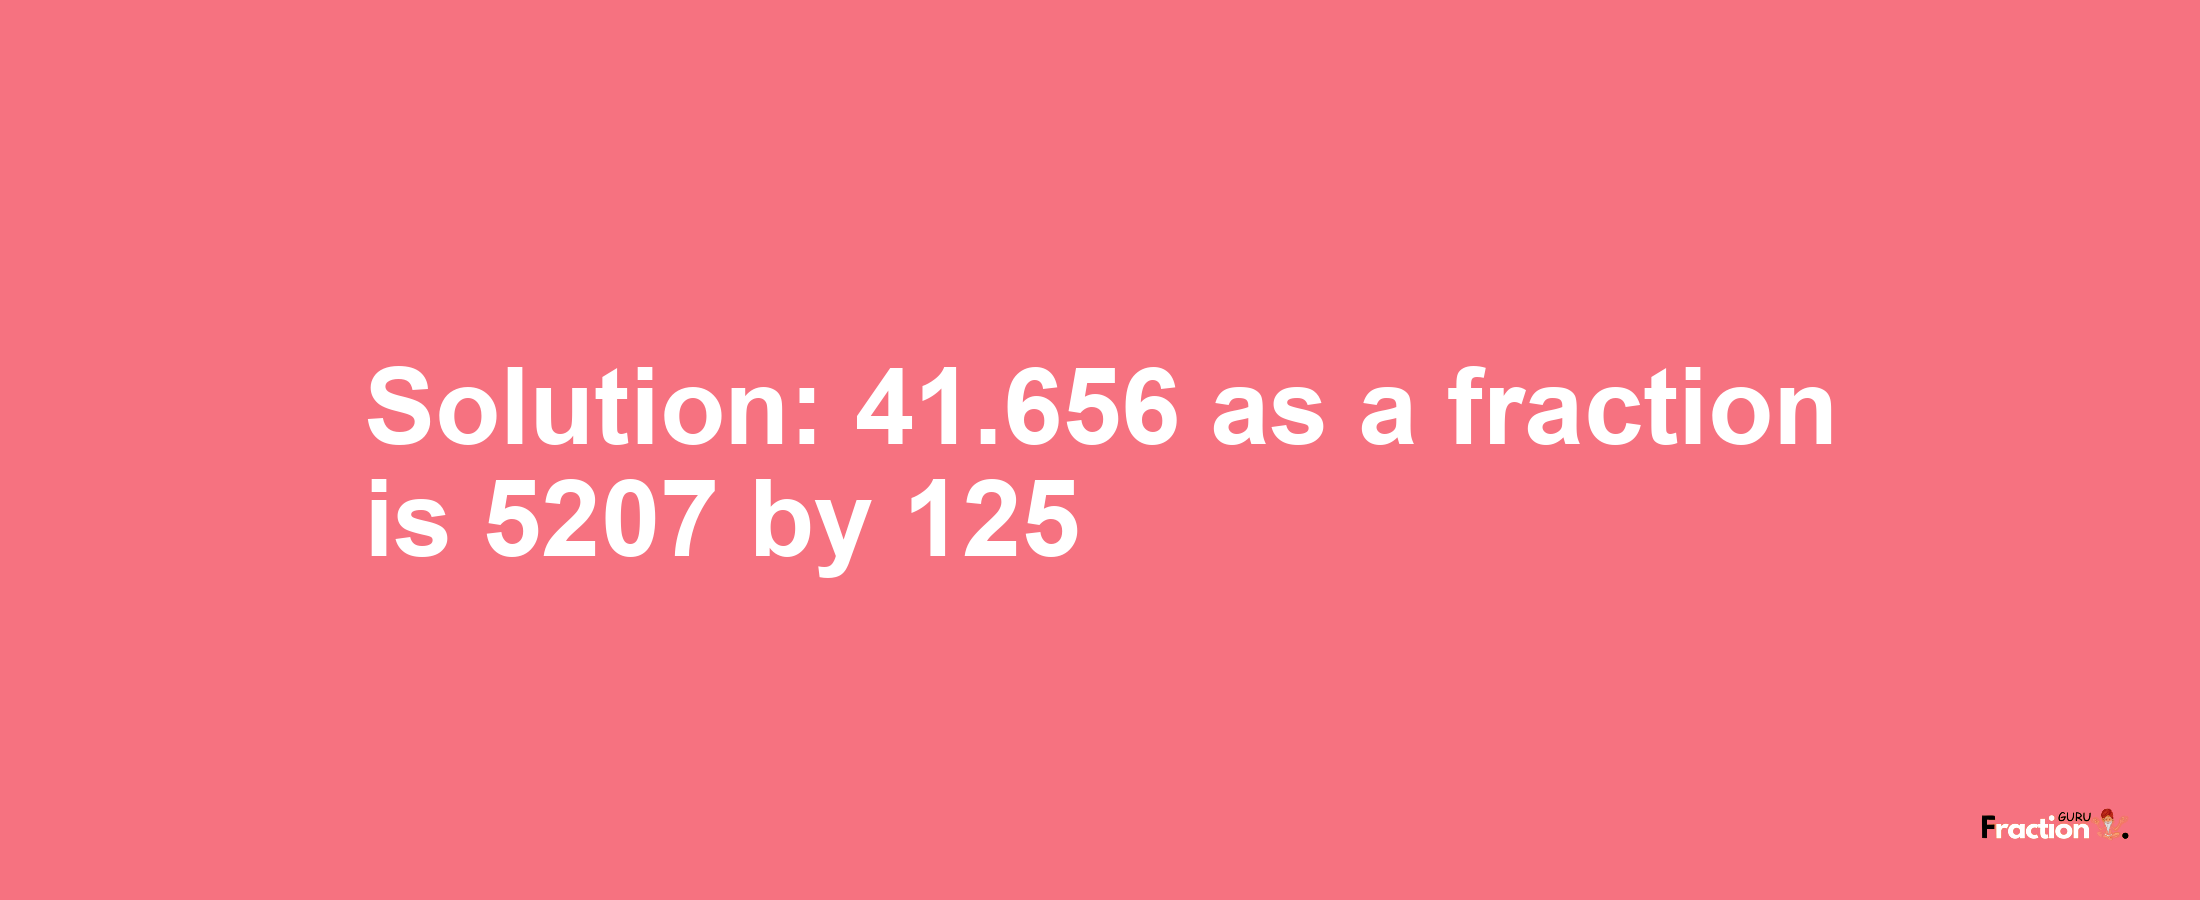 Solution:41.656 as a fraction is 5207/125